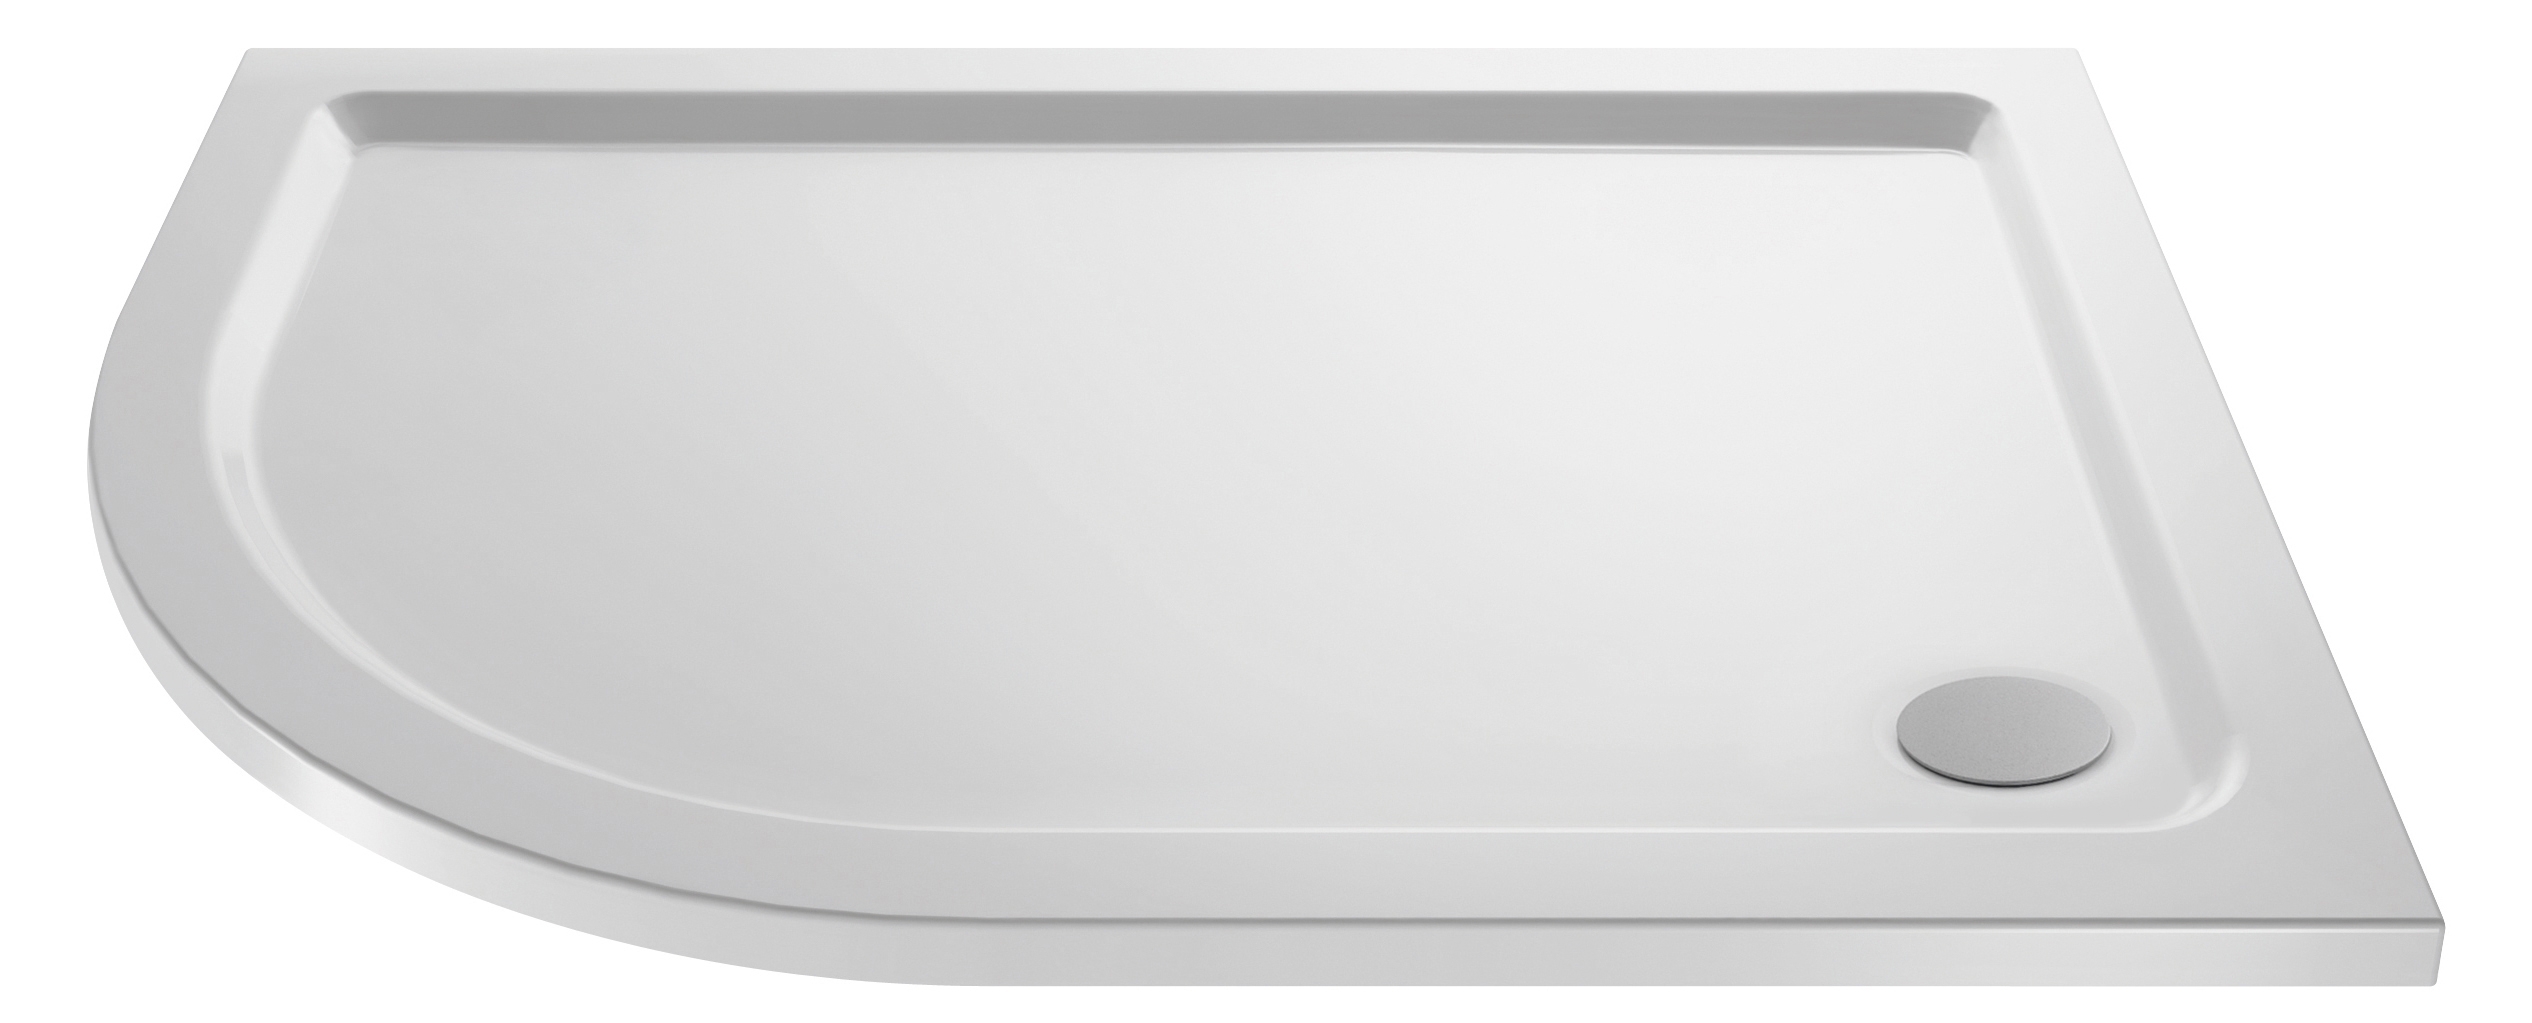 Nuie Shower Trays White Contemporary Offset Quadrant Tray 900x760mm Left Hand - NTP101 